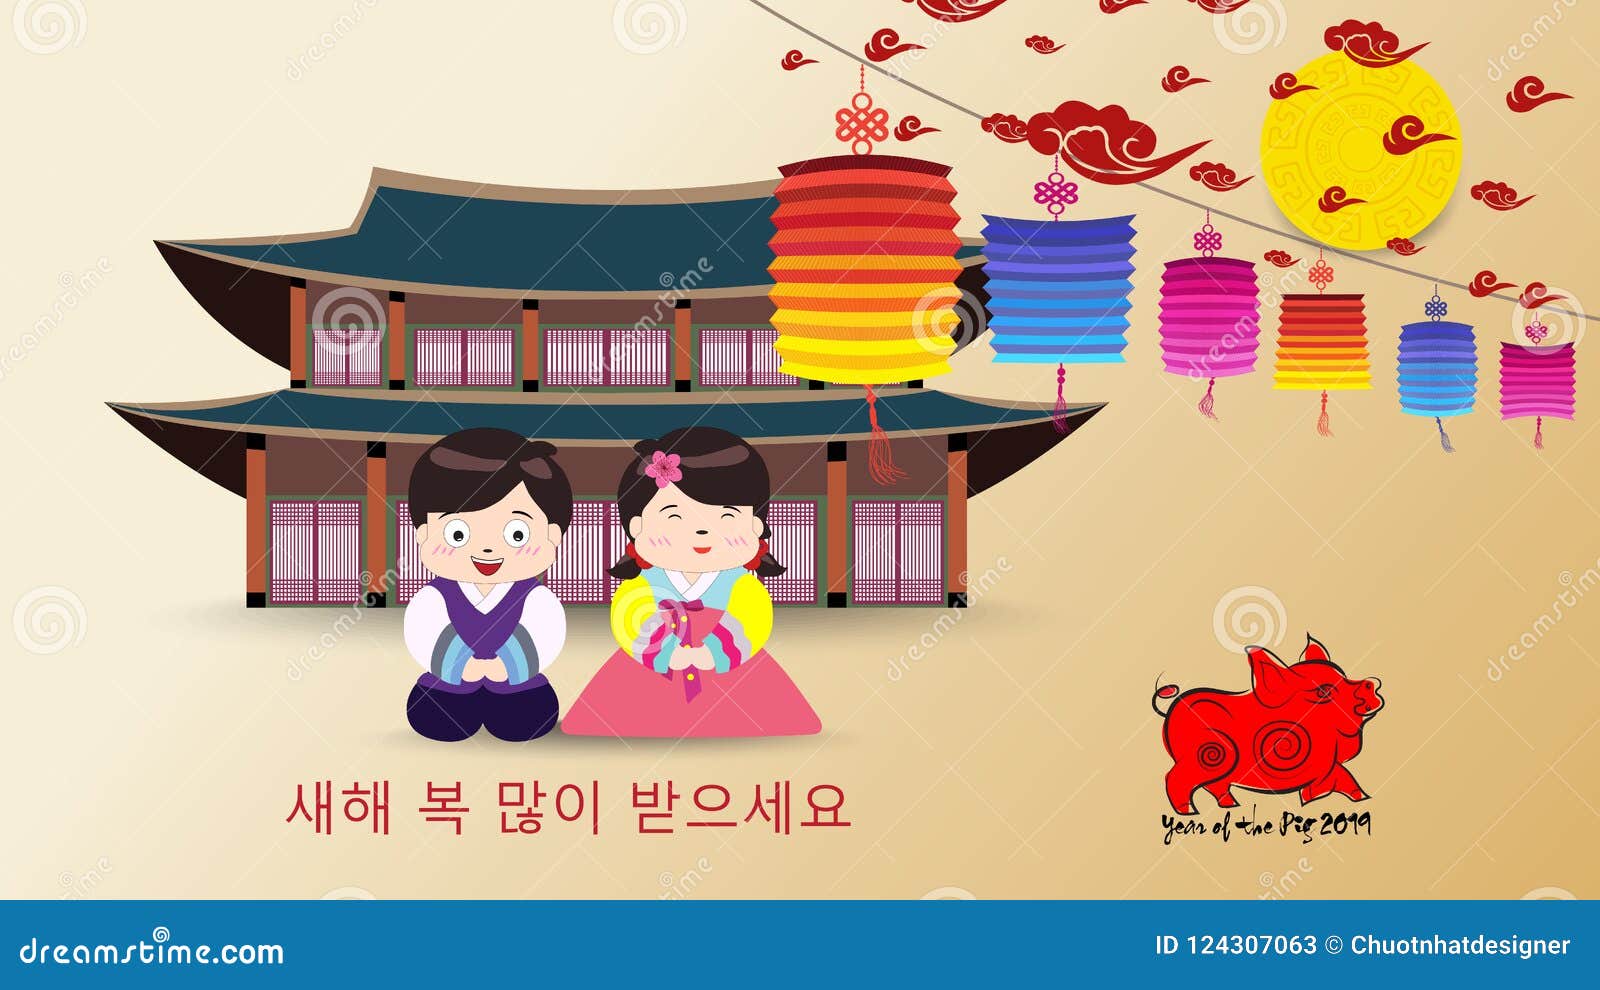 Cherry Blossom Background Korea New Year Korean Characters Mean Happy New Year Children S Greet Stock Illustration Illustration Of Lunar Culture